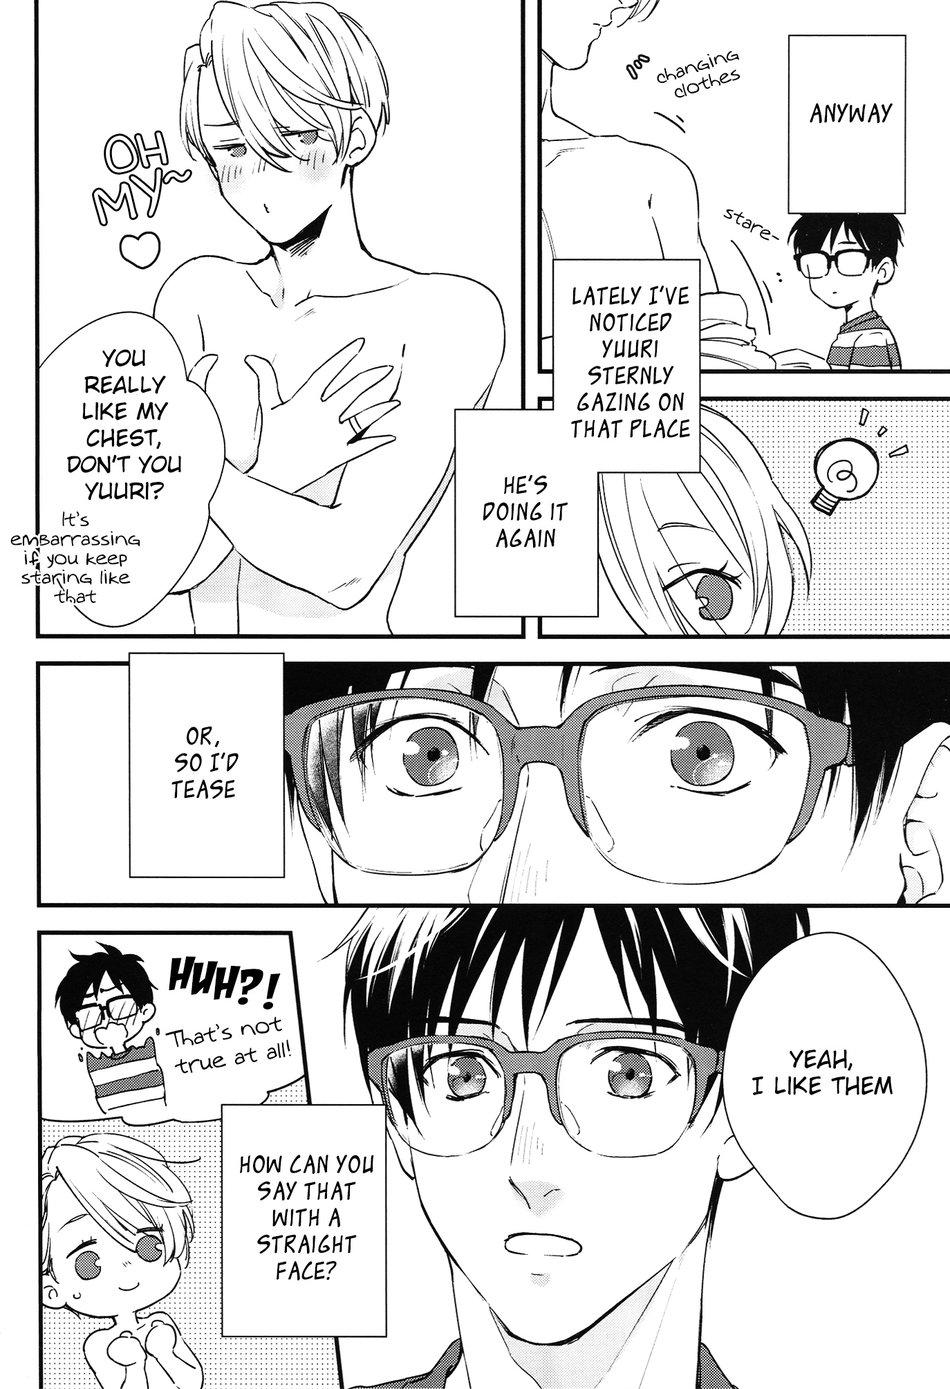 Stranger Love Me, Touch Me - Yuri on ice Socks - Page 8